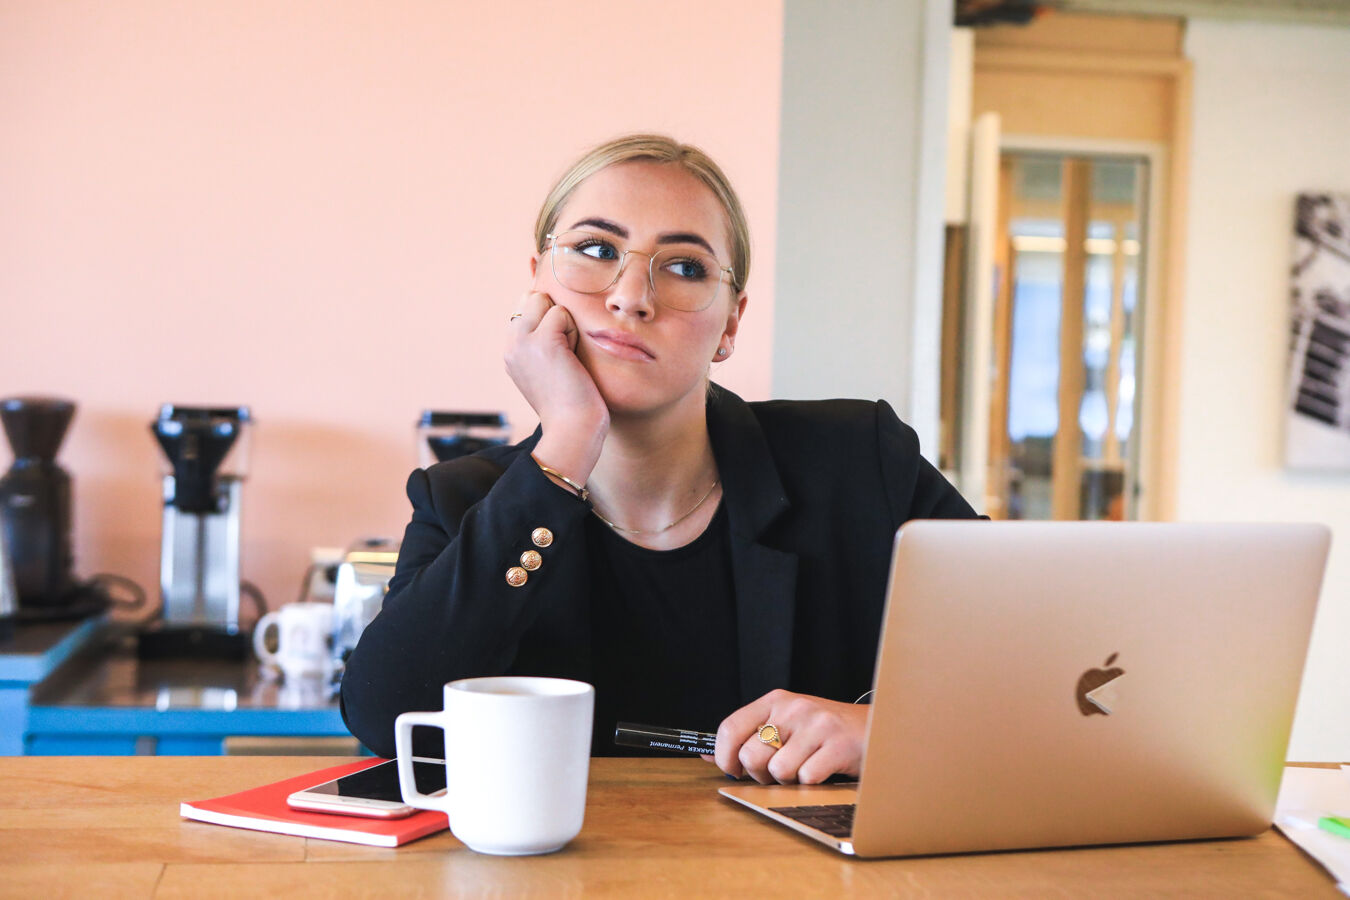 A business woman in an office setting looking fed up behind a silver Apple laptop computer